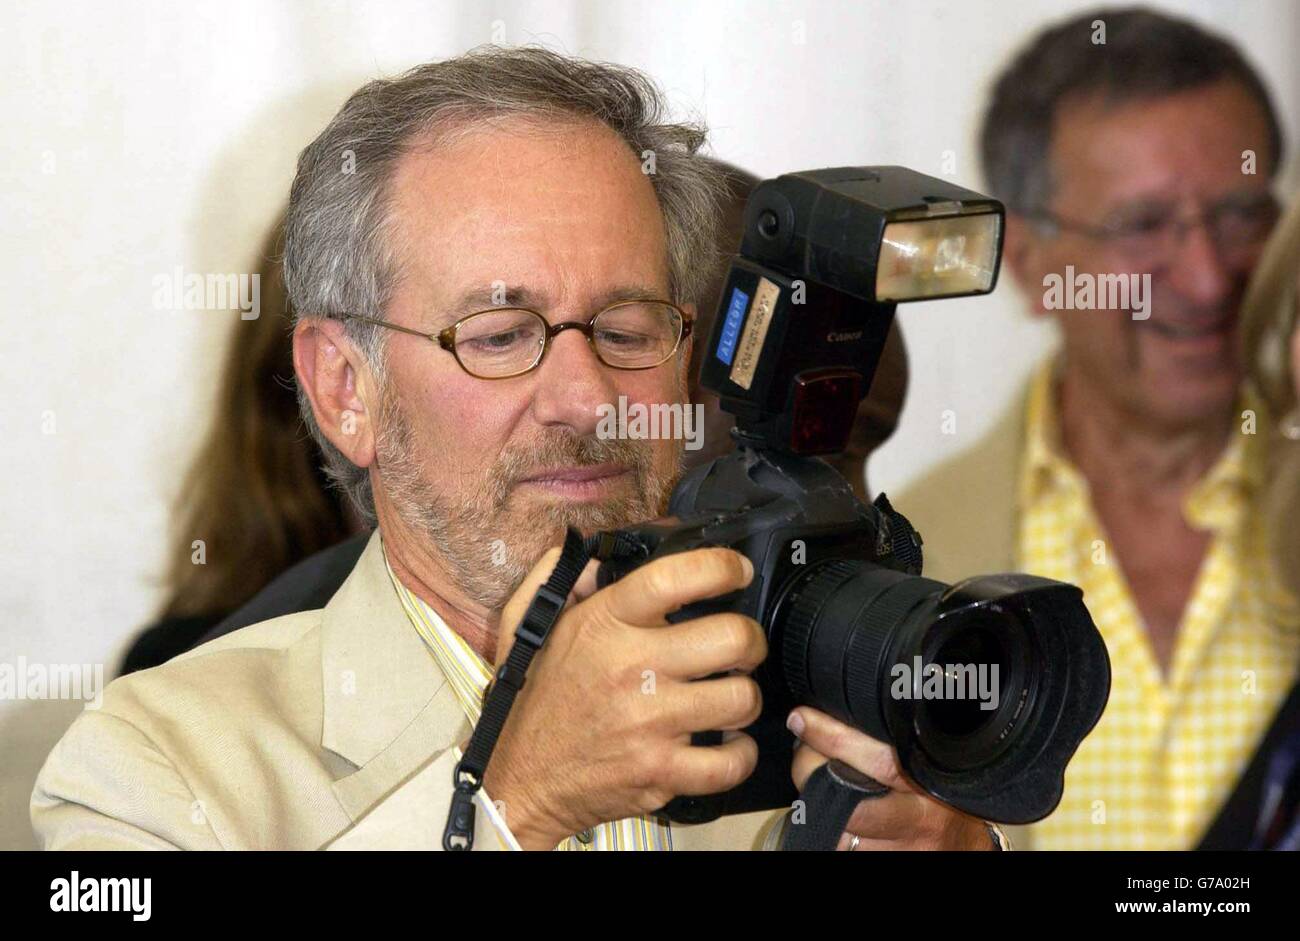 Director Steven Spielberg examines a photographers camera during a photocall at the Lido in Venice to promote his new film Terminal during the 61st International Venice Film Festival. Stock Photo